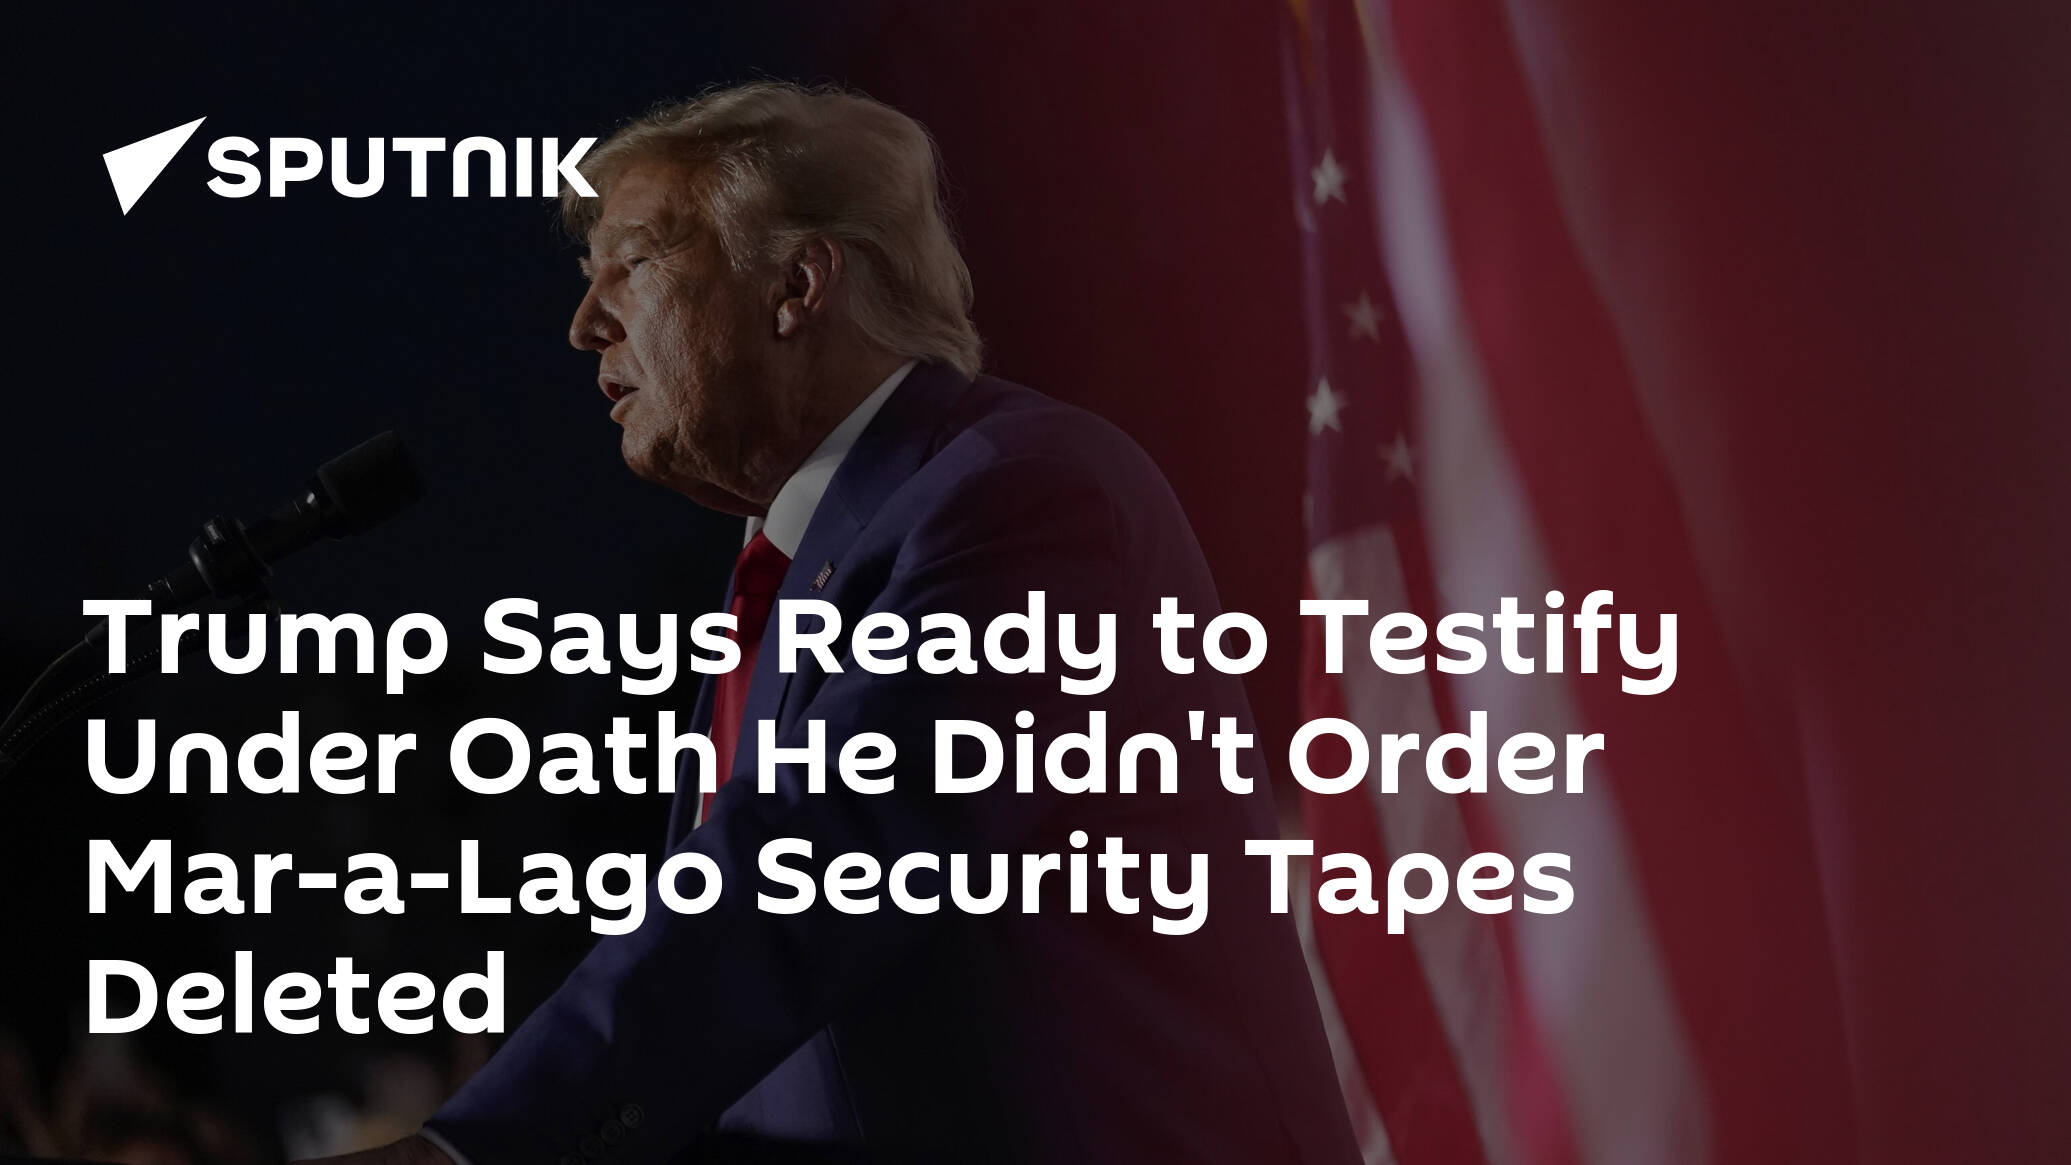 Trump Says Ready to Testify Under Oath He Didn't Order Mar-a-Lago Security Tapes Deleted